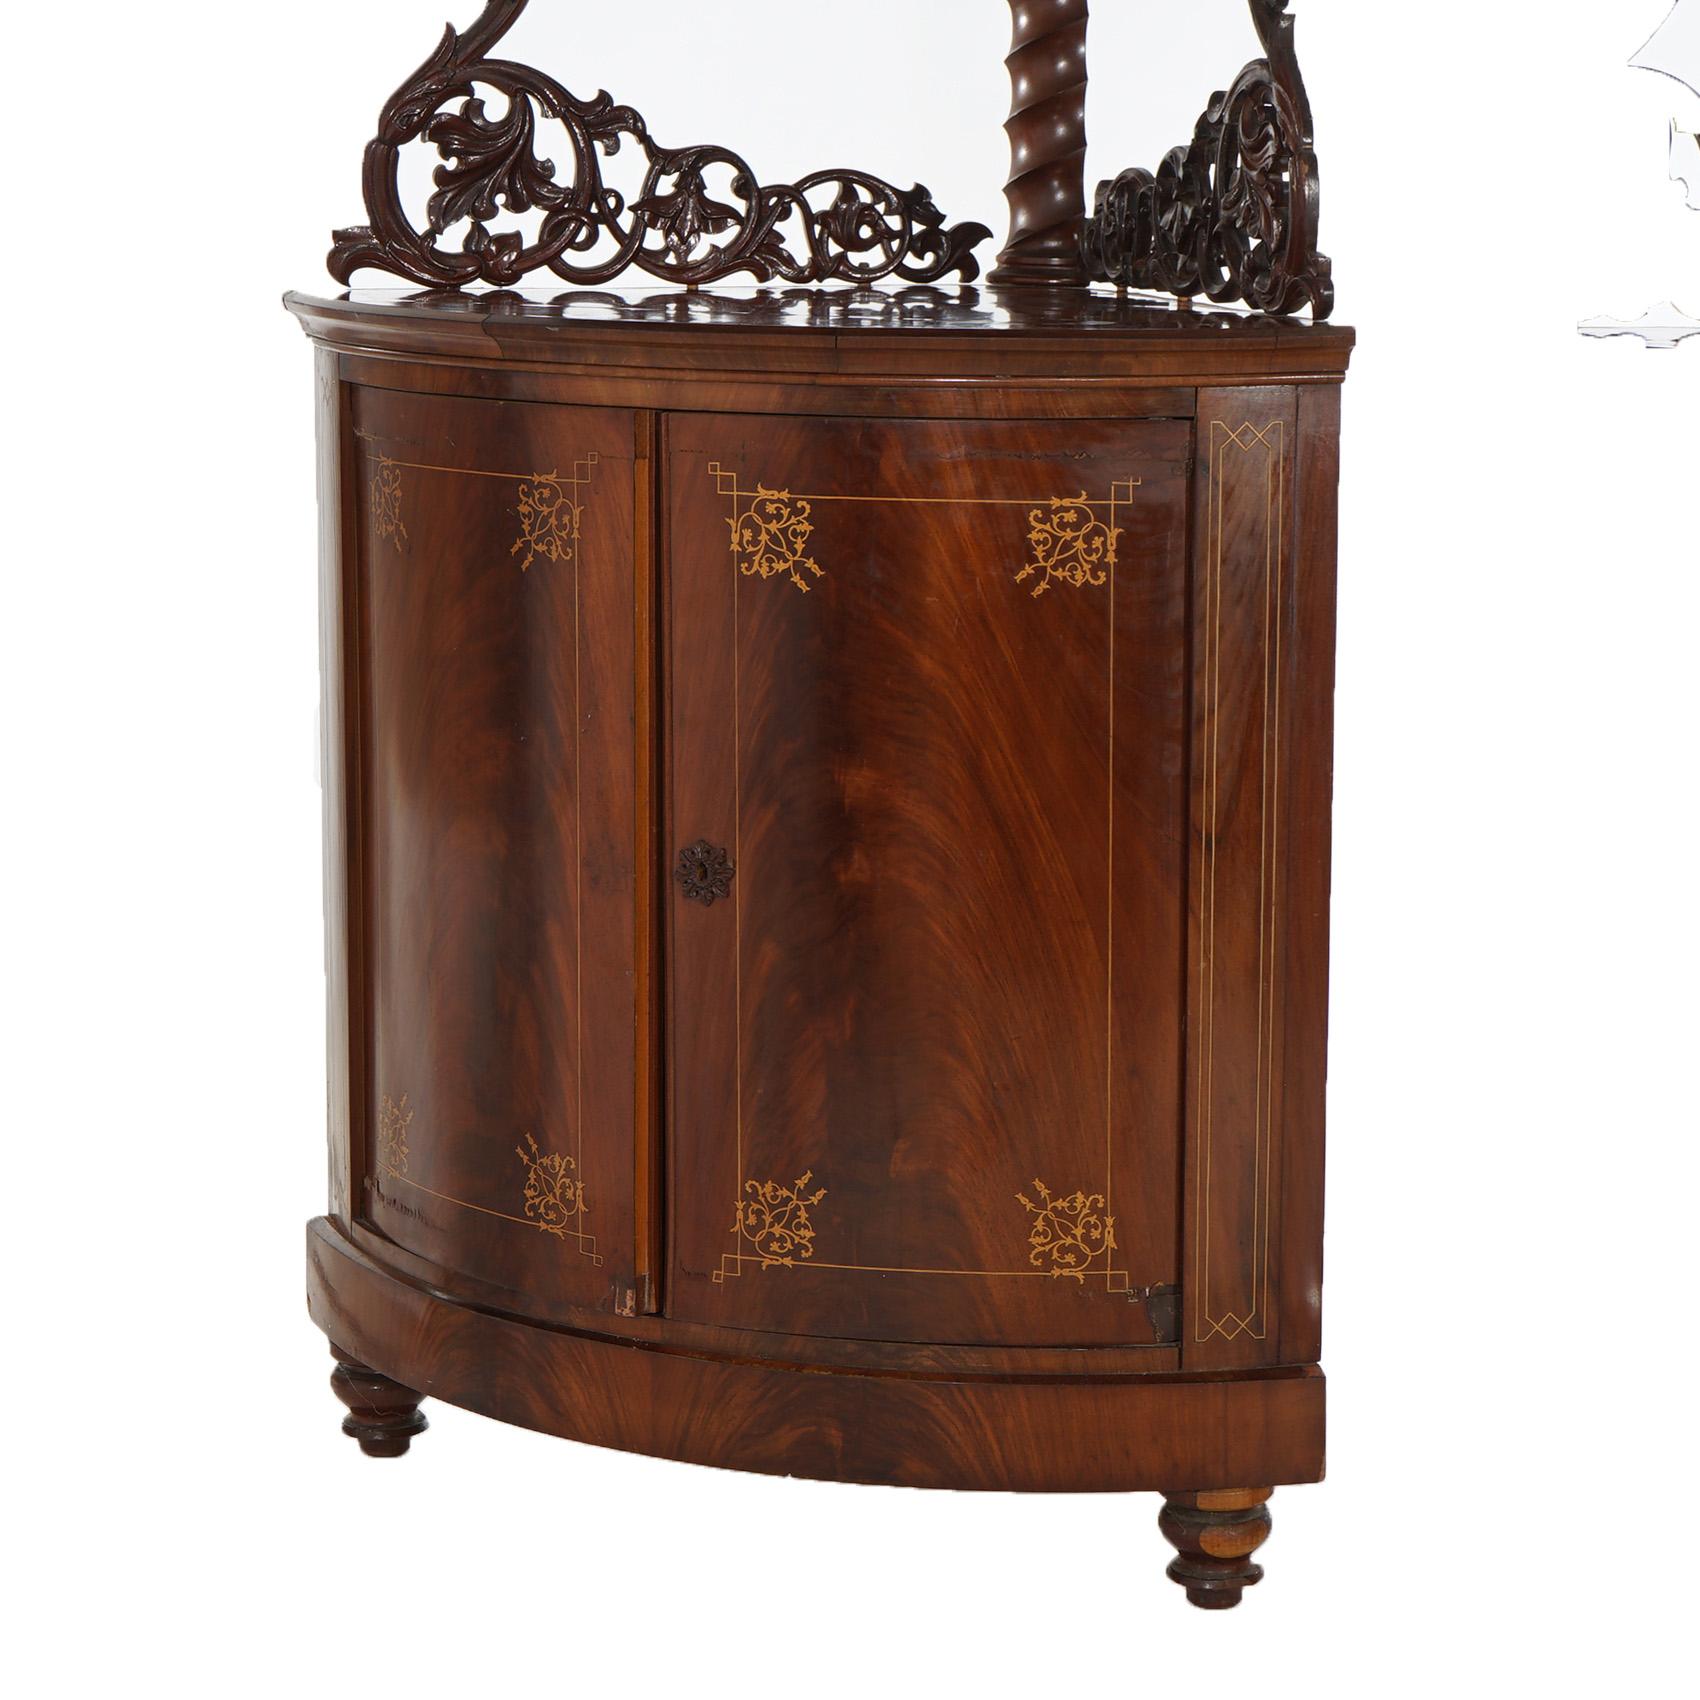 Antique Pair of Mahogany Inlaid, Pierced & Carved Corner Curio Cabinet c1870 In Good Condition For Sale In Big Flats, NY